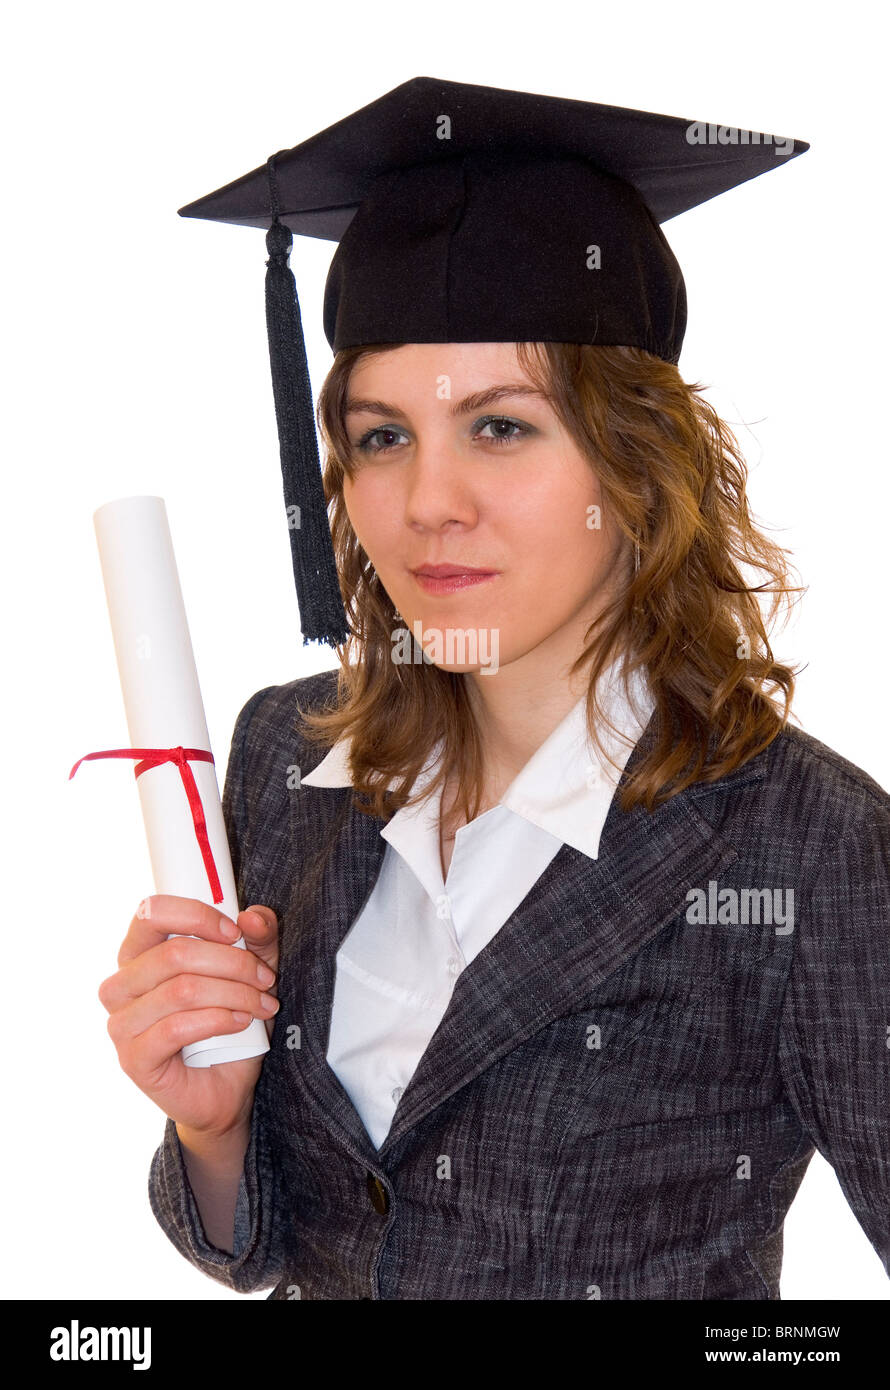 Young women after graduation with diploma in right hand, isolated on white Stock Photo